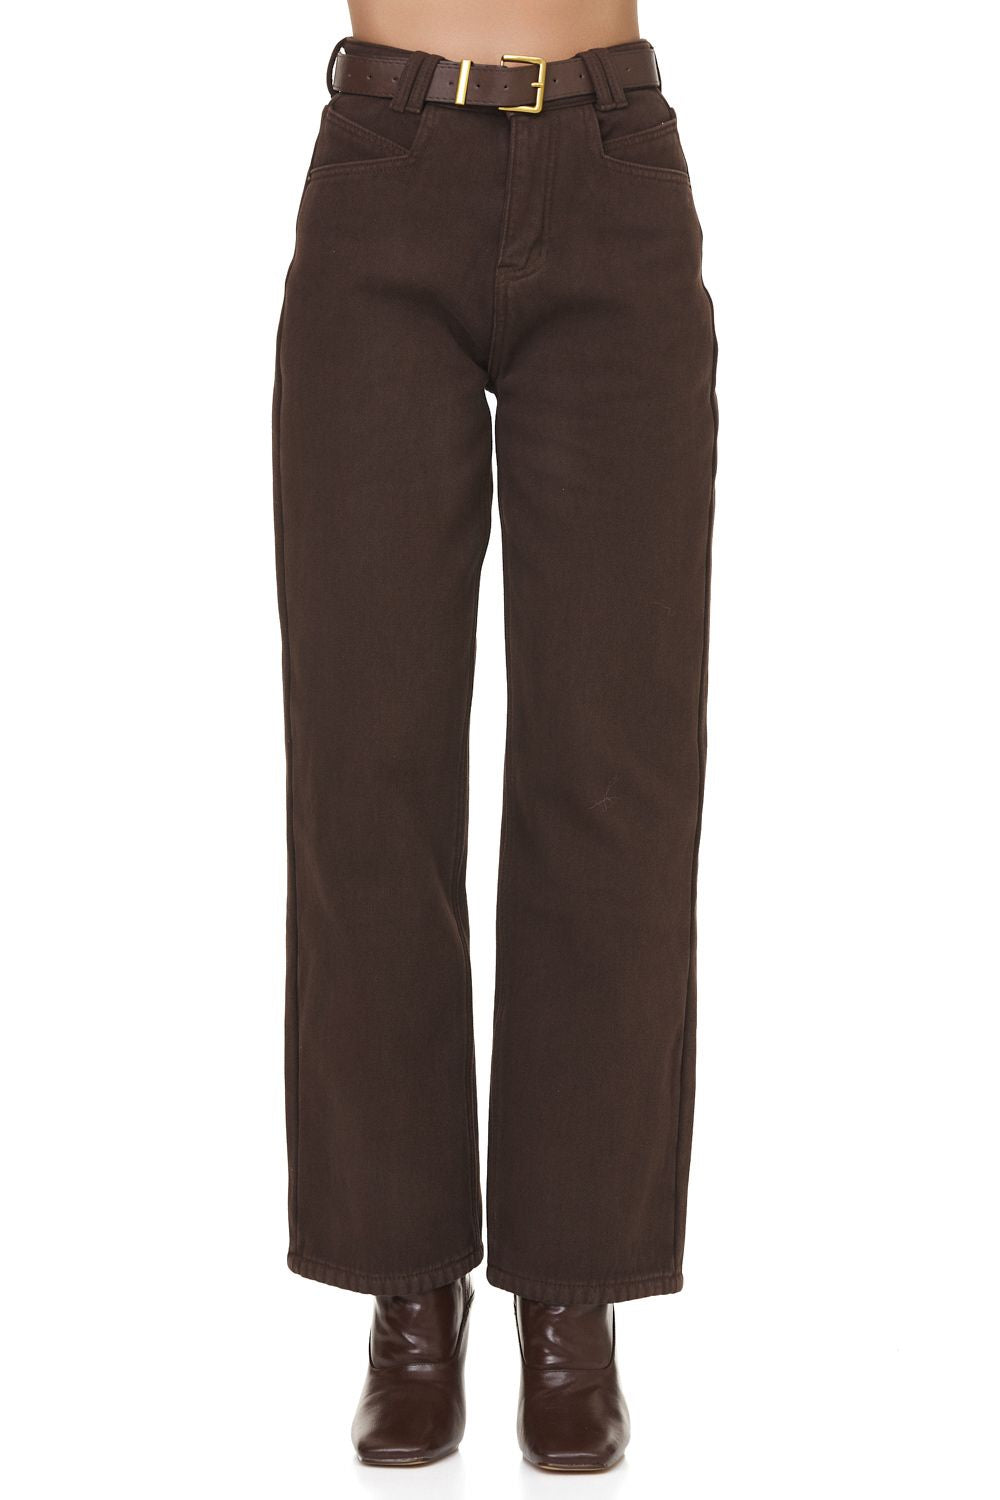 Regely Bogas brown casual women's jeans